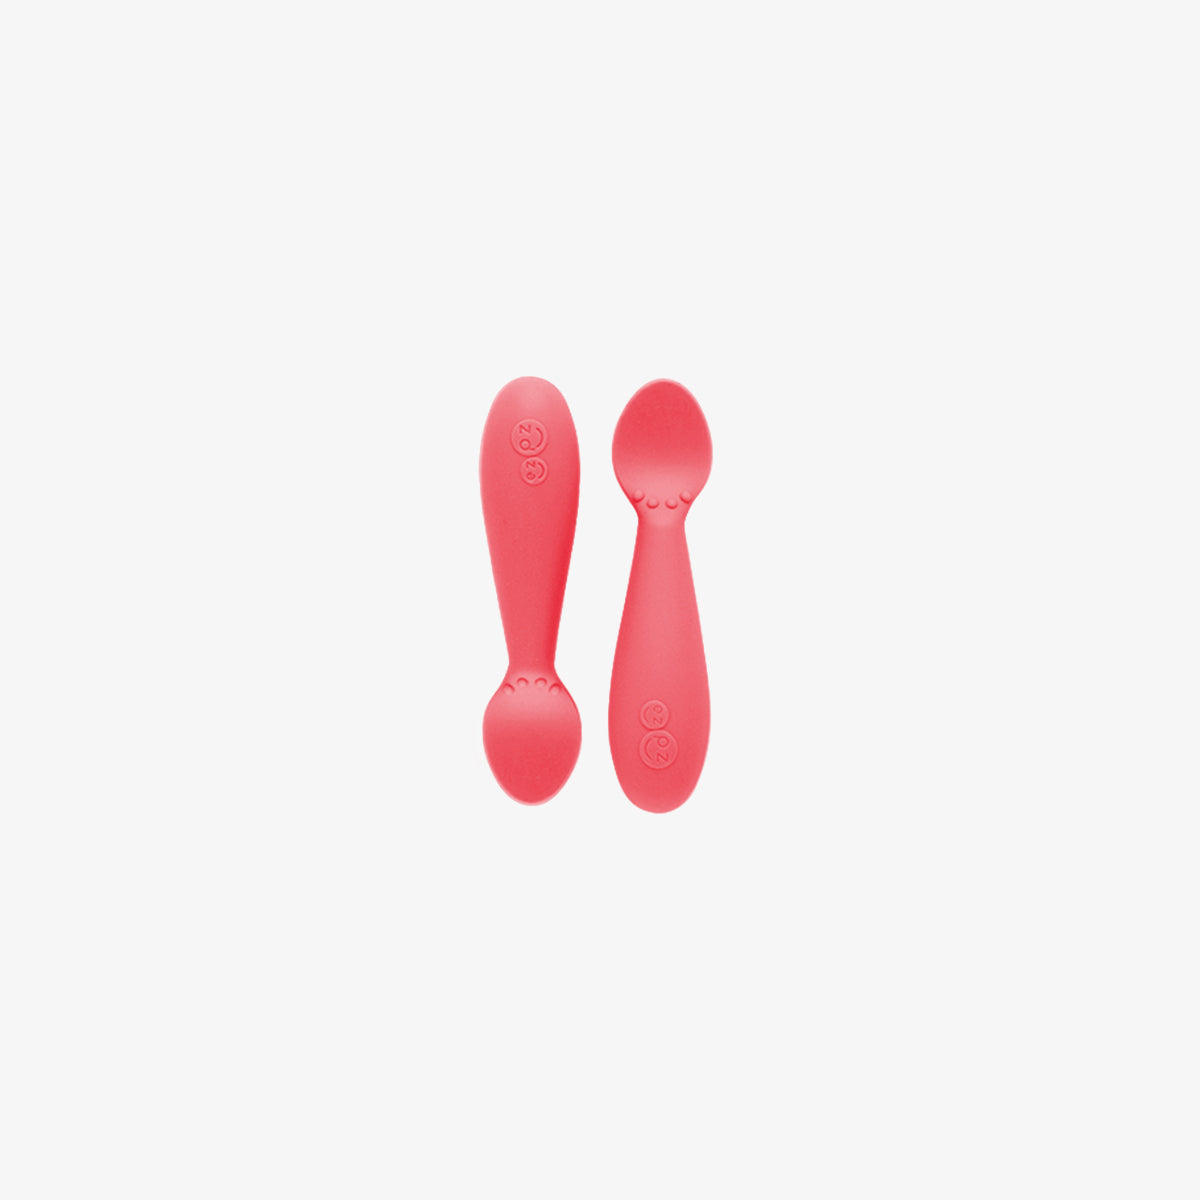 The Tiny Spoon in Coral by ezpz / Small, Sensory Silicone Spoon for Babies